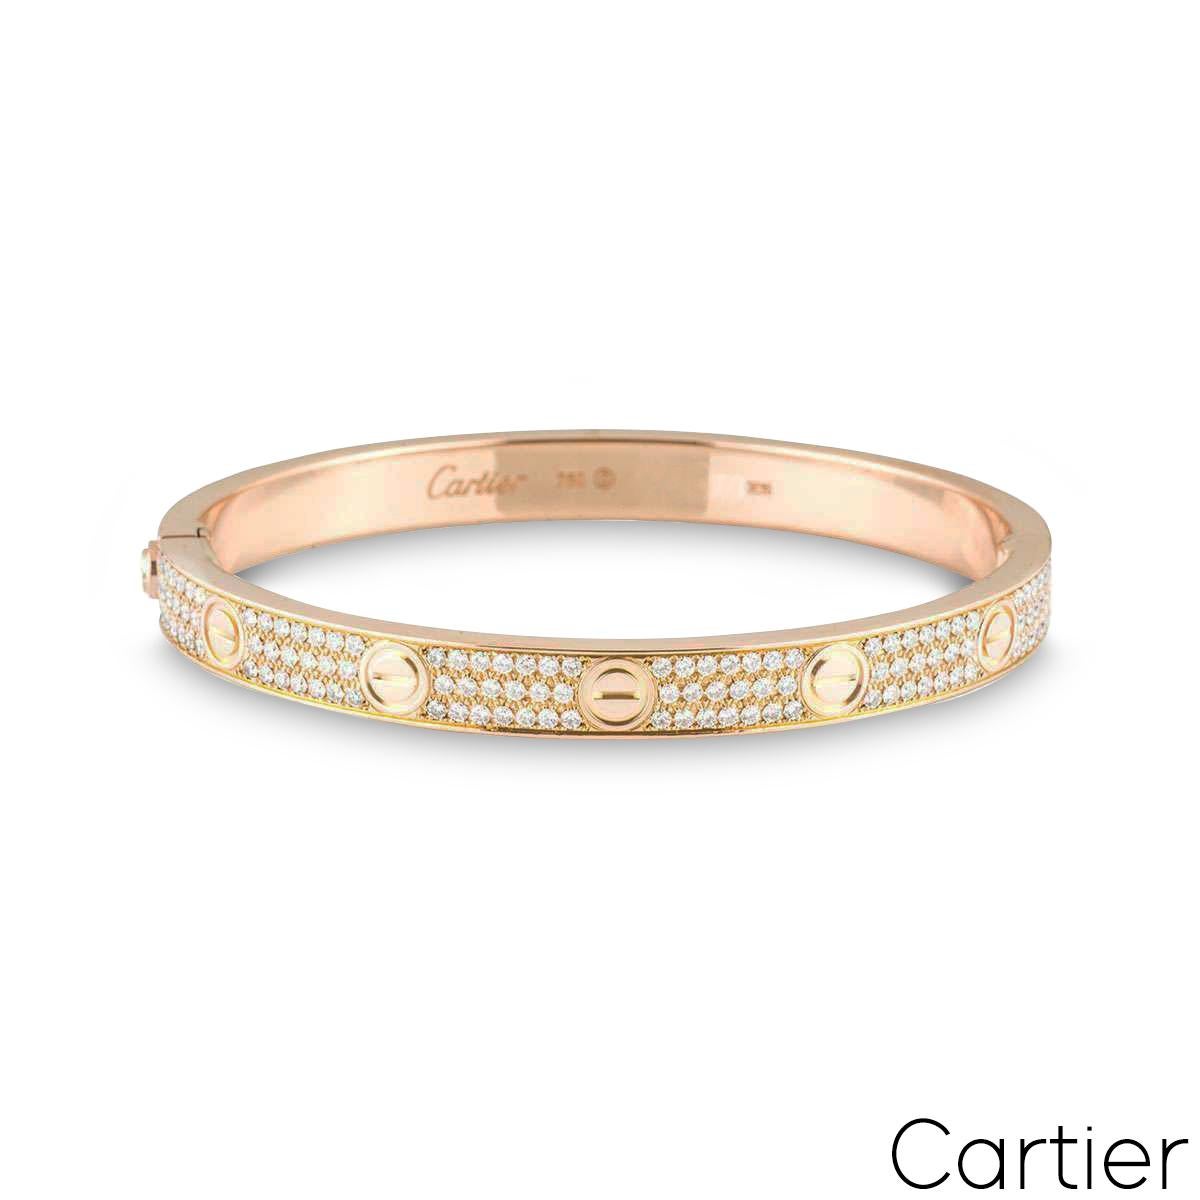 A sparkly 18k rose gold diamond Cartier bracelet from the Love collection. The bracelet comprises of the iconic screw motif on the outer edge complemented with 204 round brilliant cut diamonds throughout, in a pave setting. The diamonds have an